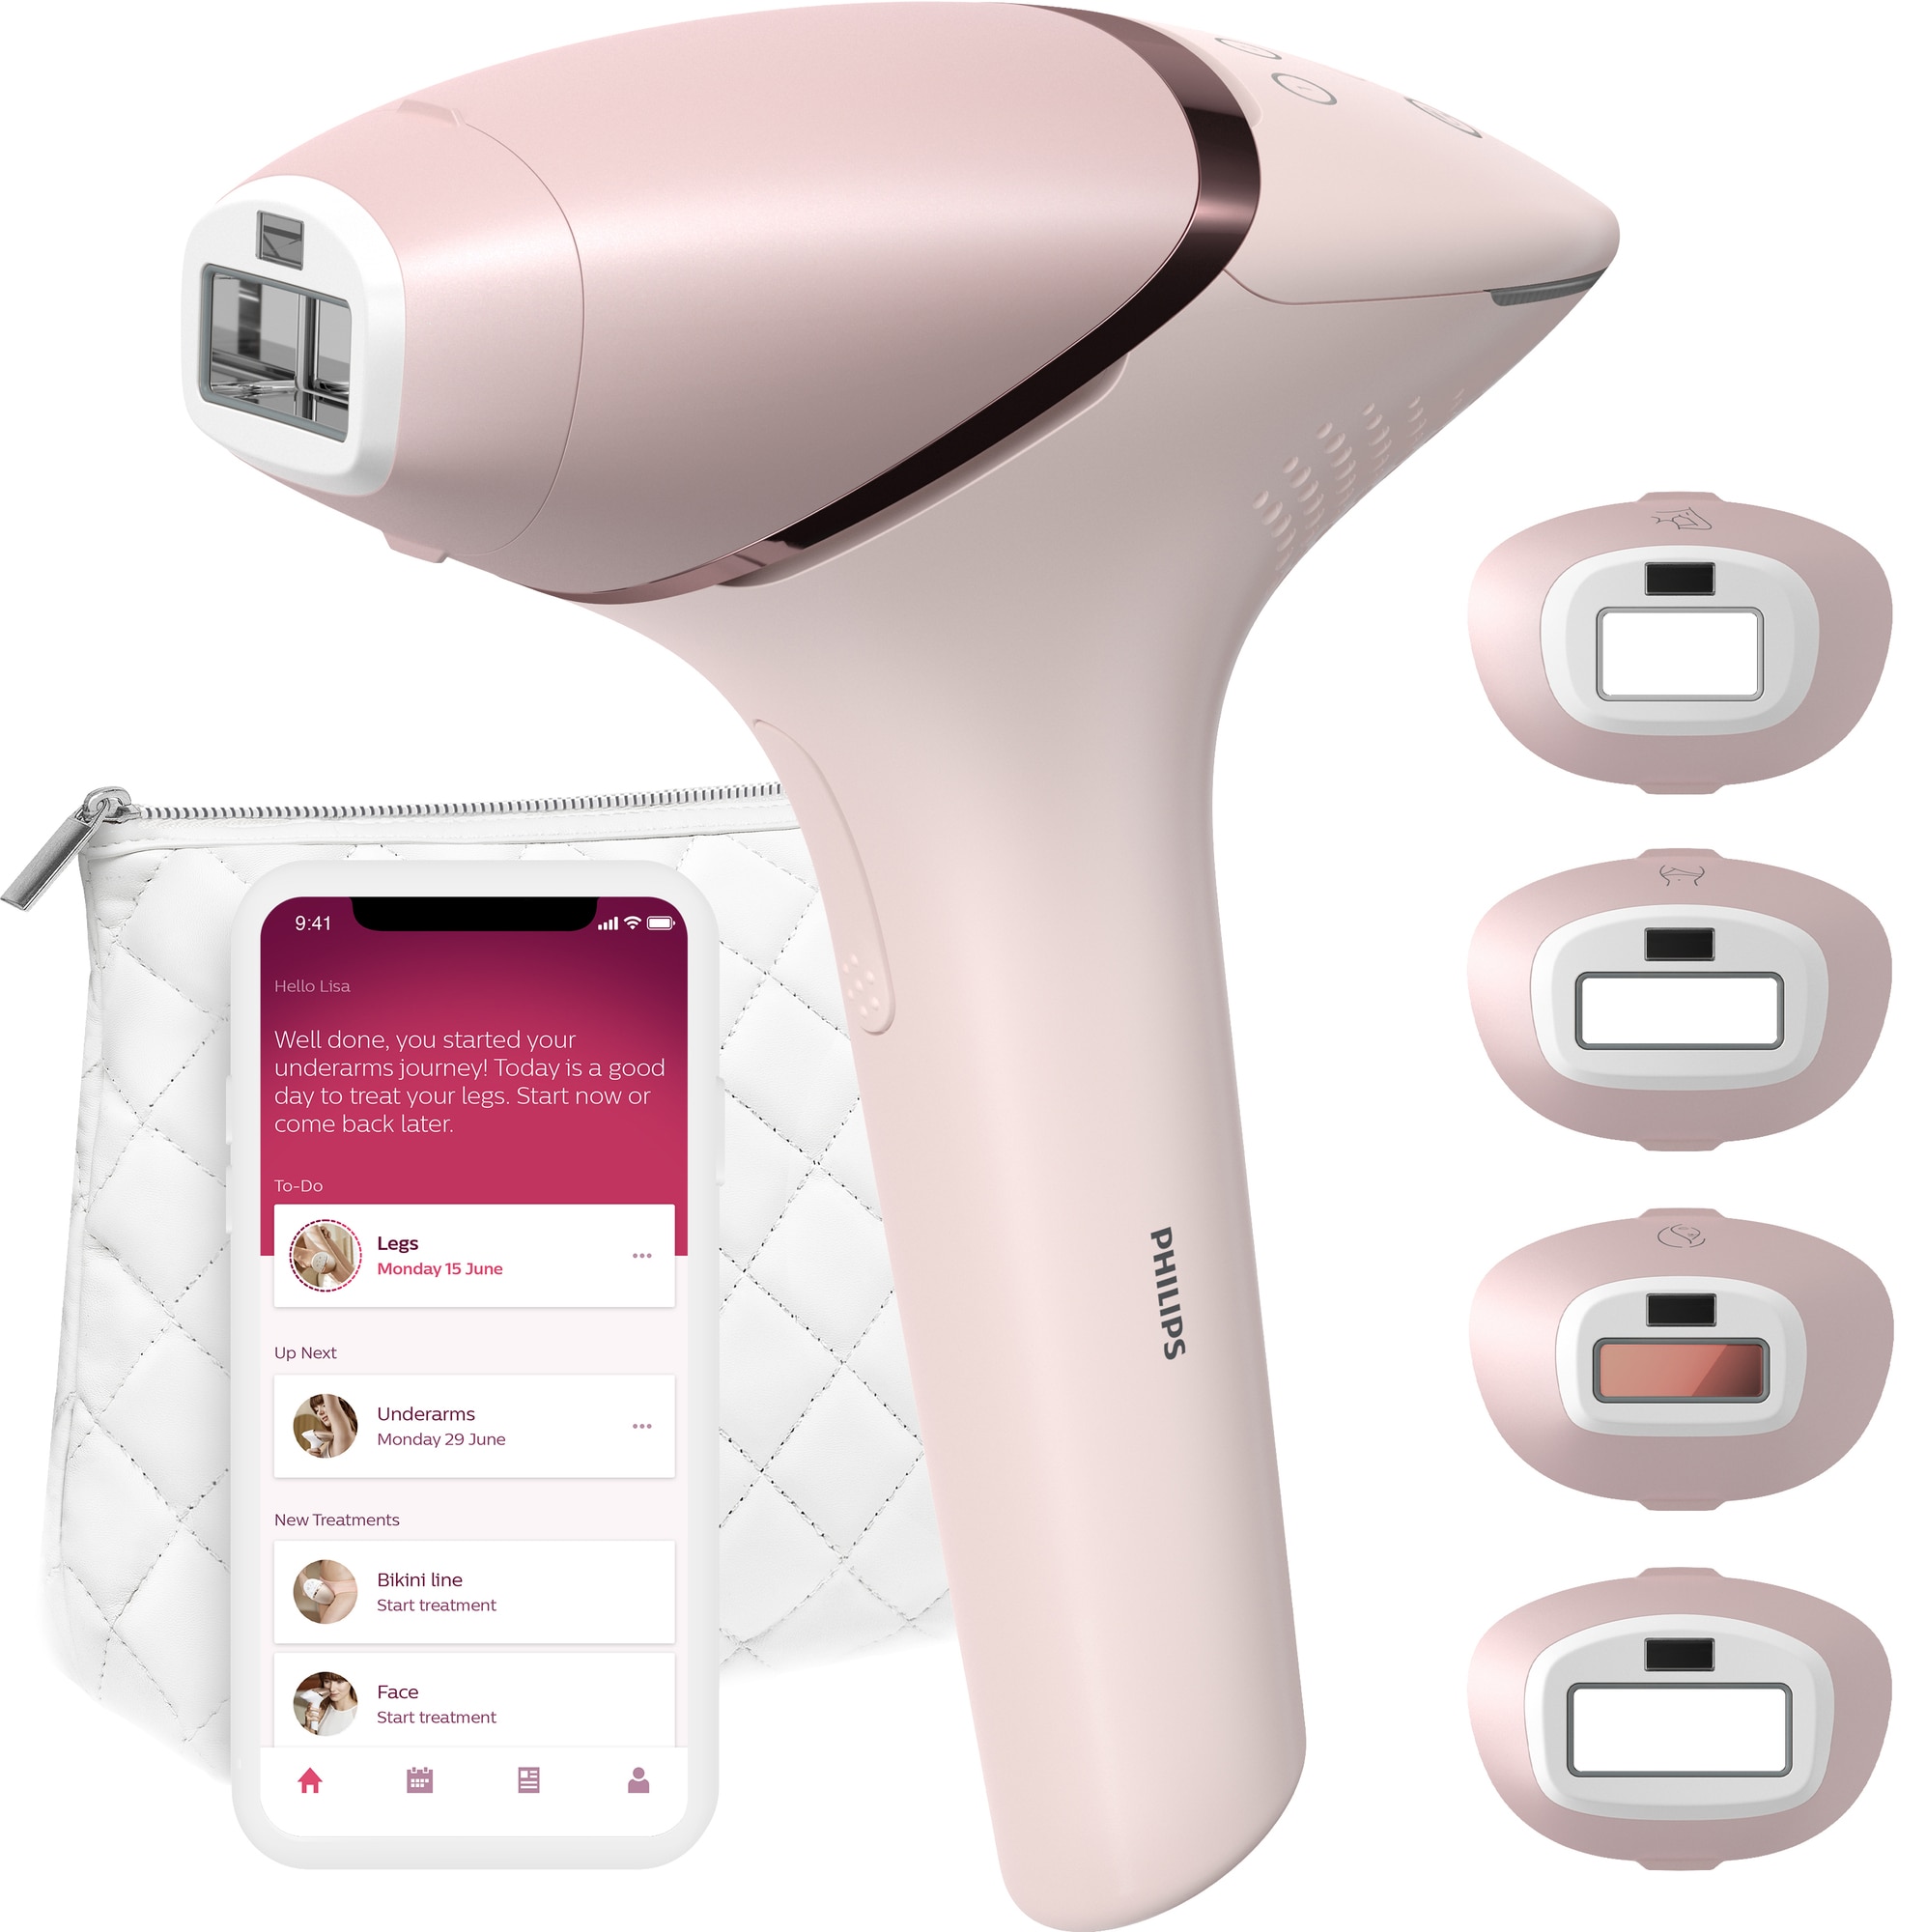 Philips Lumea IPL Hair removal - try it for yourself 